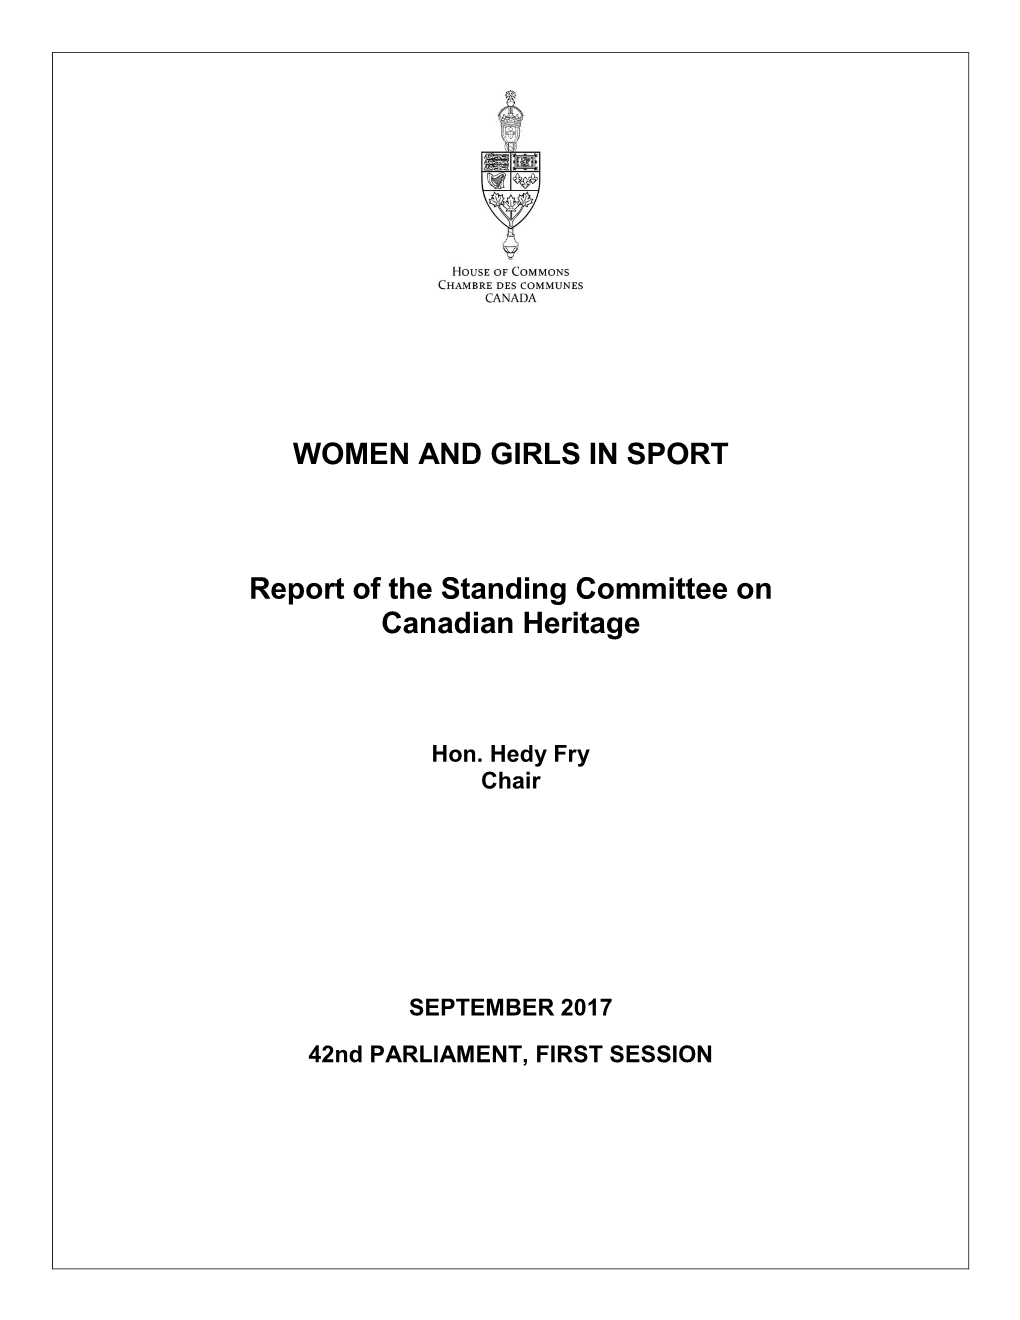 Report of the Standing Committee of Canadian Heritage